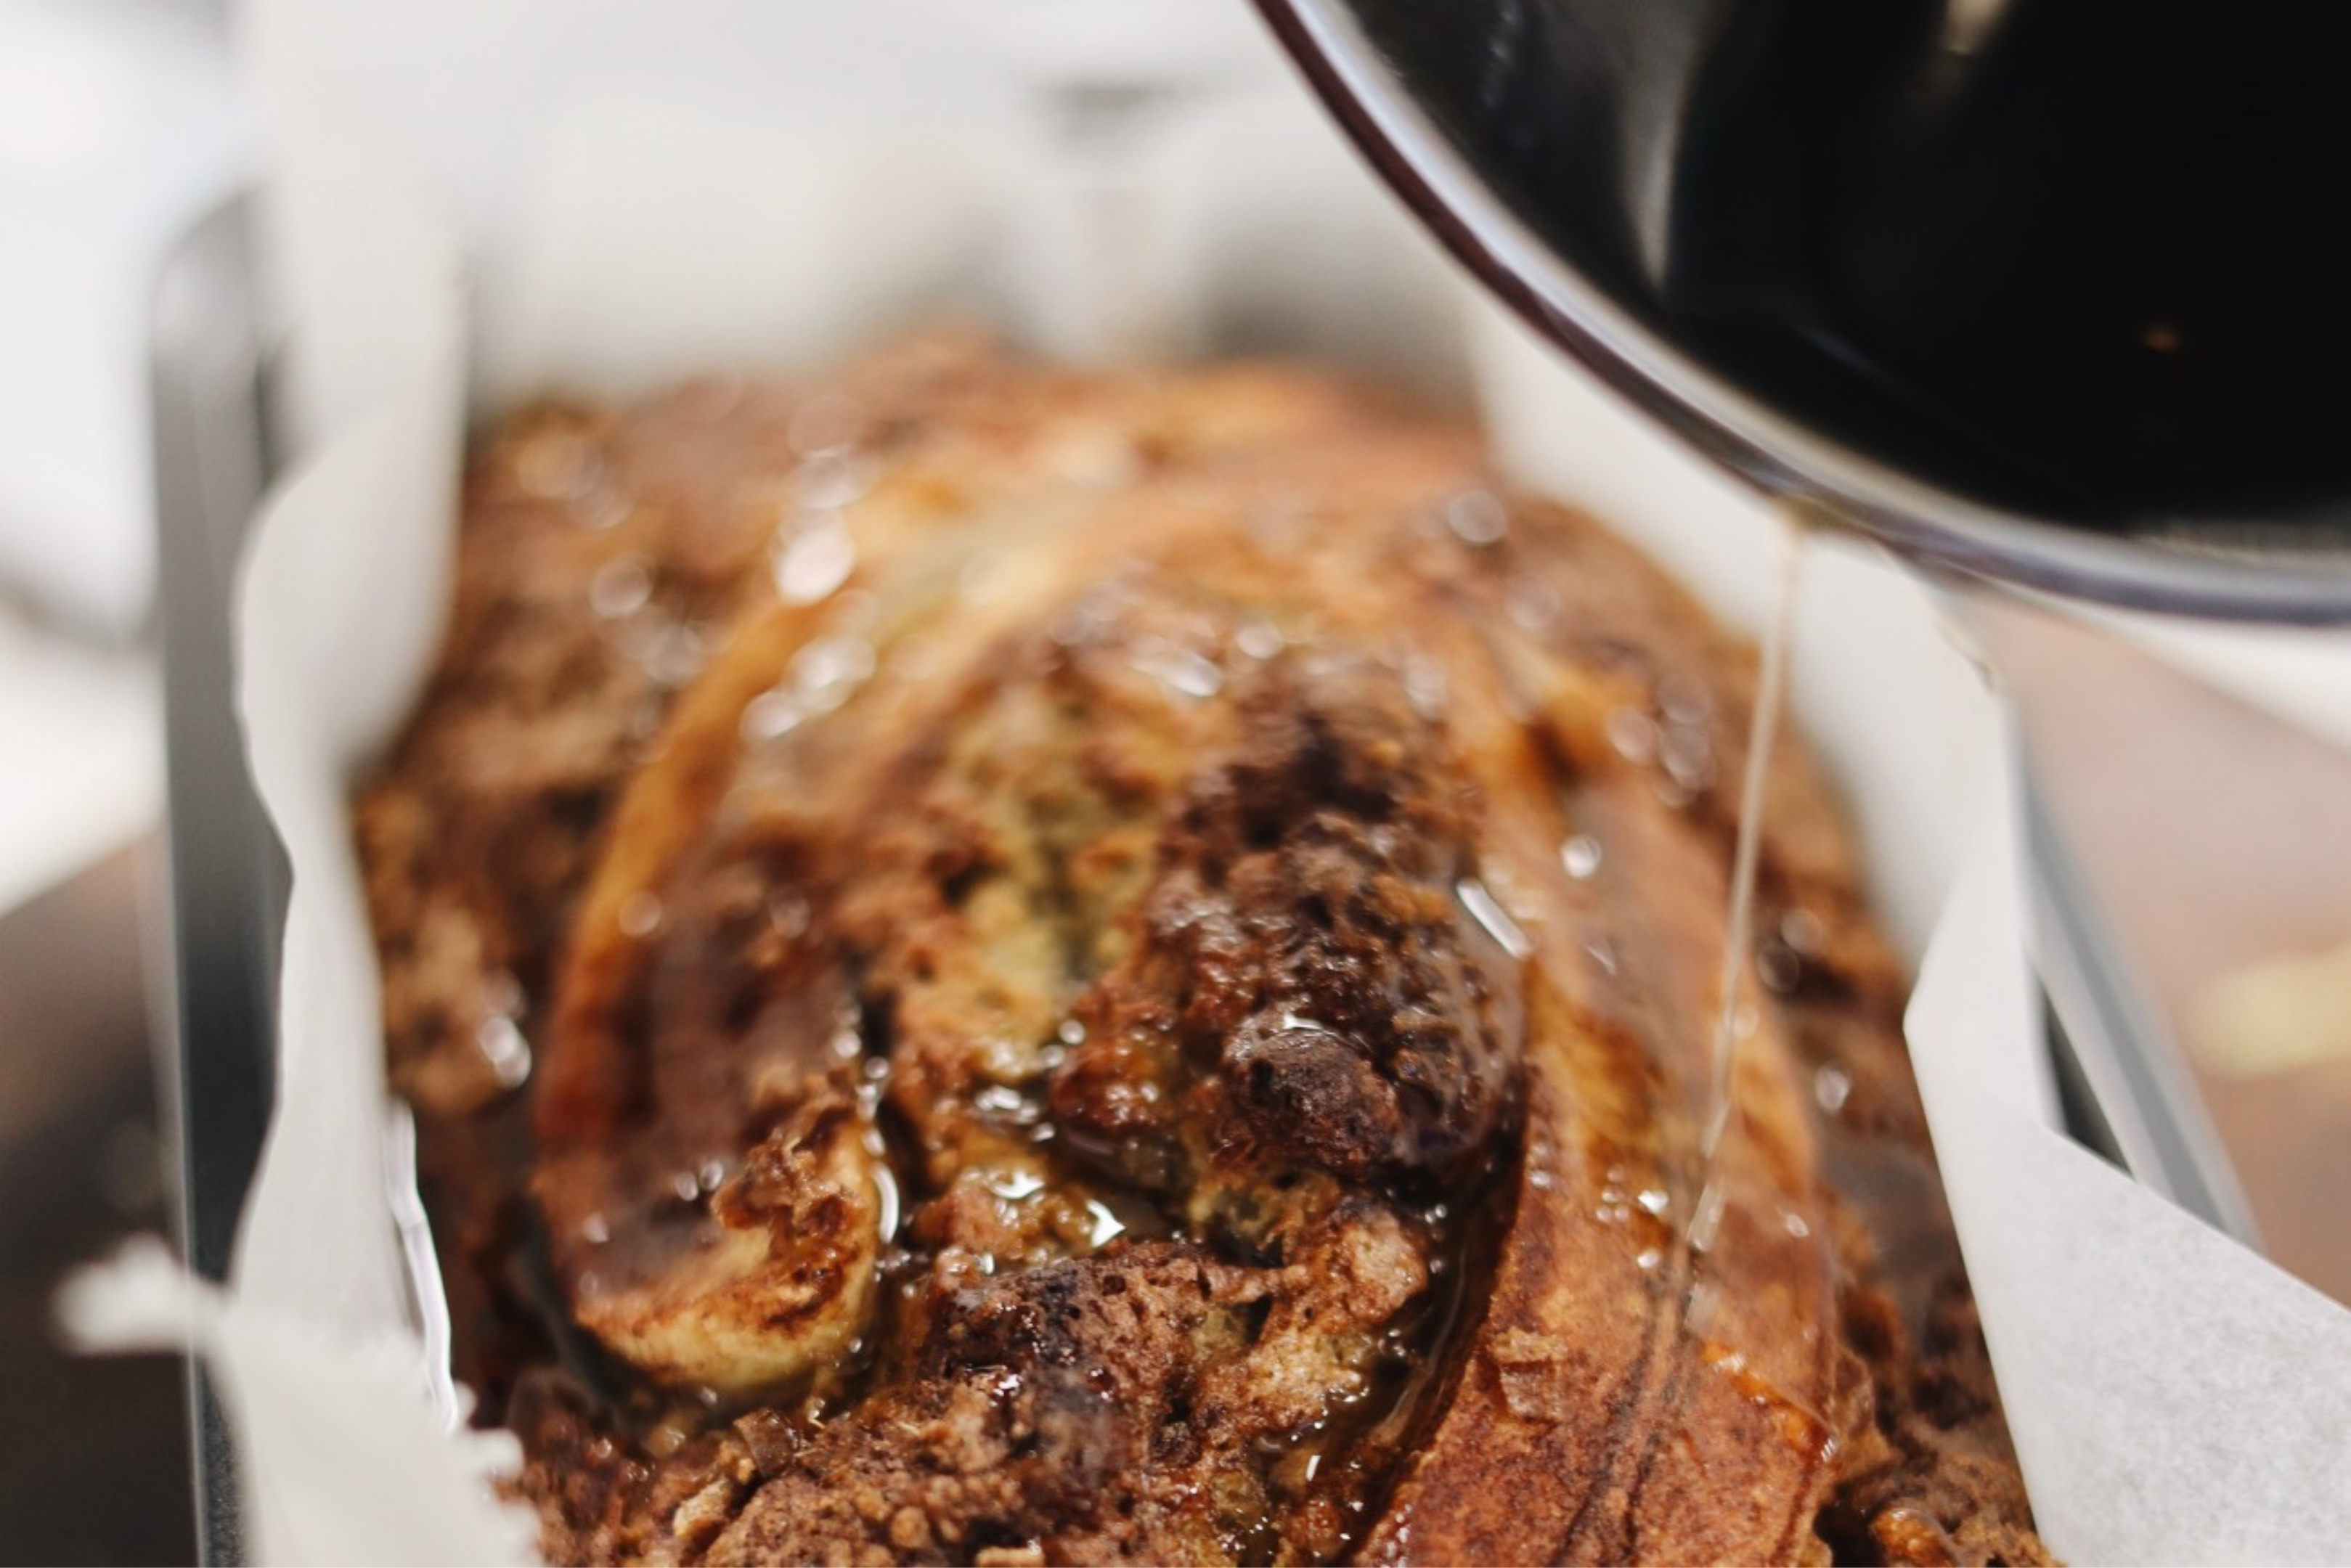 ginger banana loaf drizzled with syrup